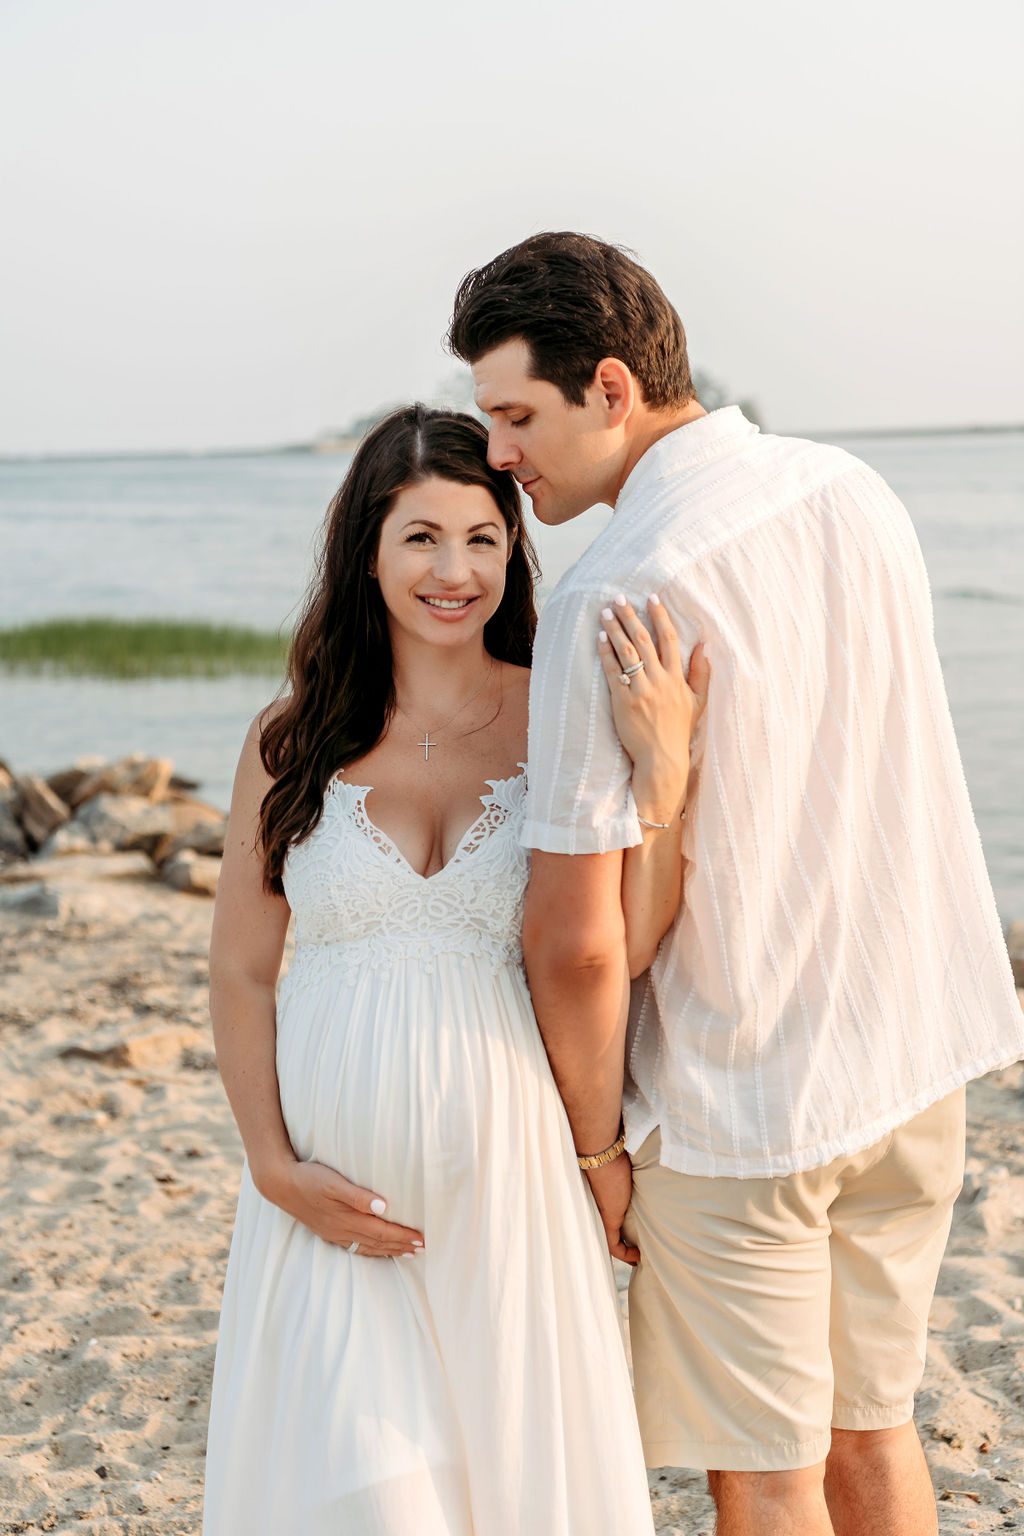 A mom to be in a white maternity gown stands on a beach with her husband nuzzling her head